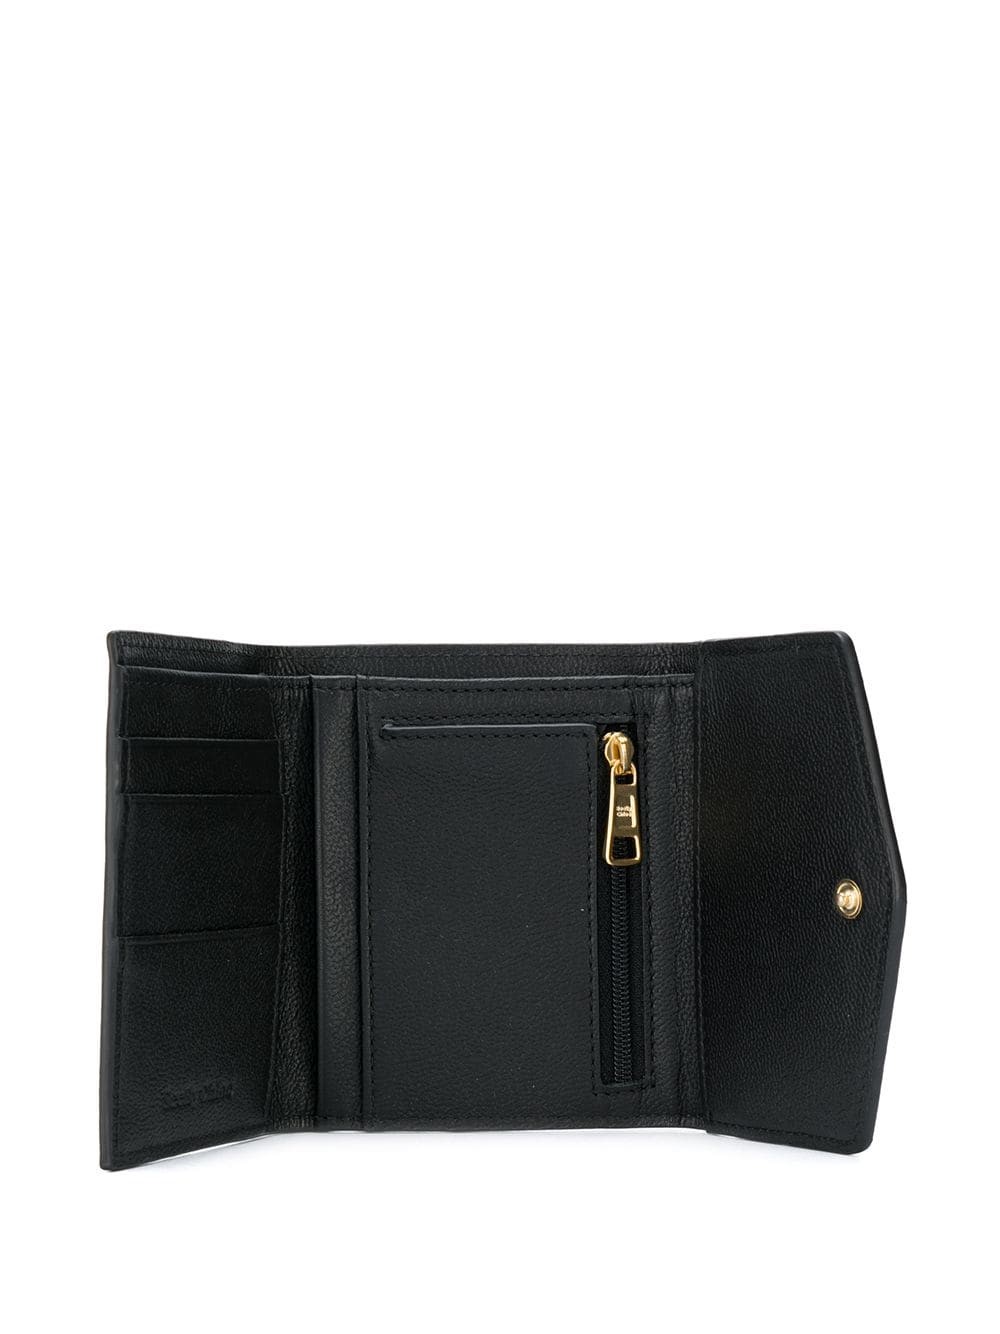 see by chloe` COMPACT WALLET available on montiboutique.com - 30951